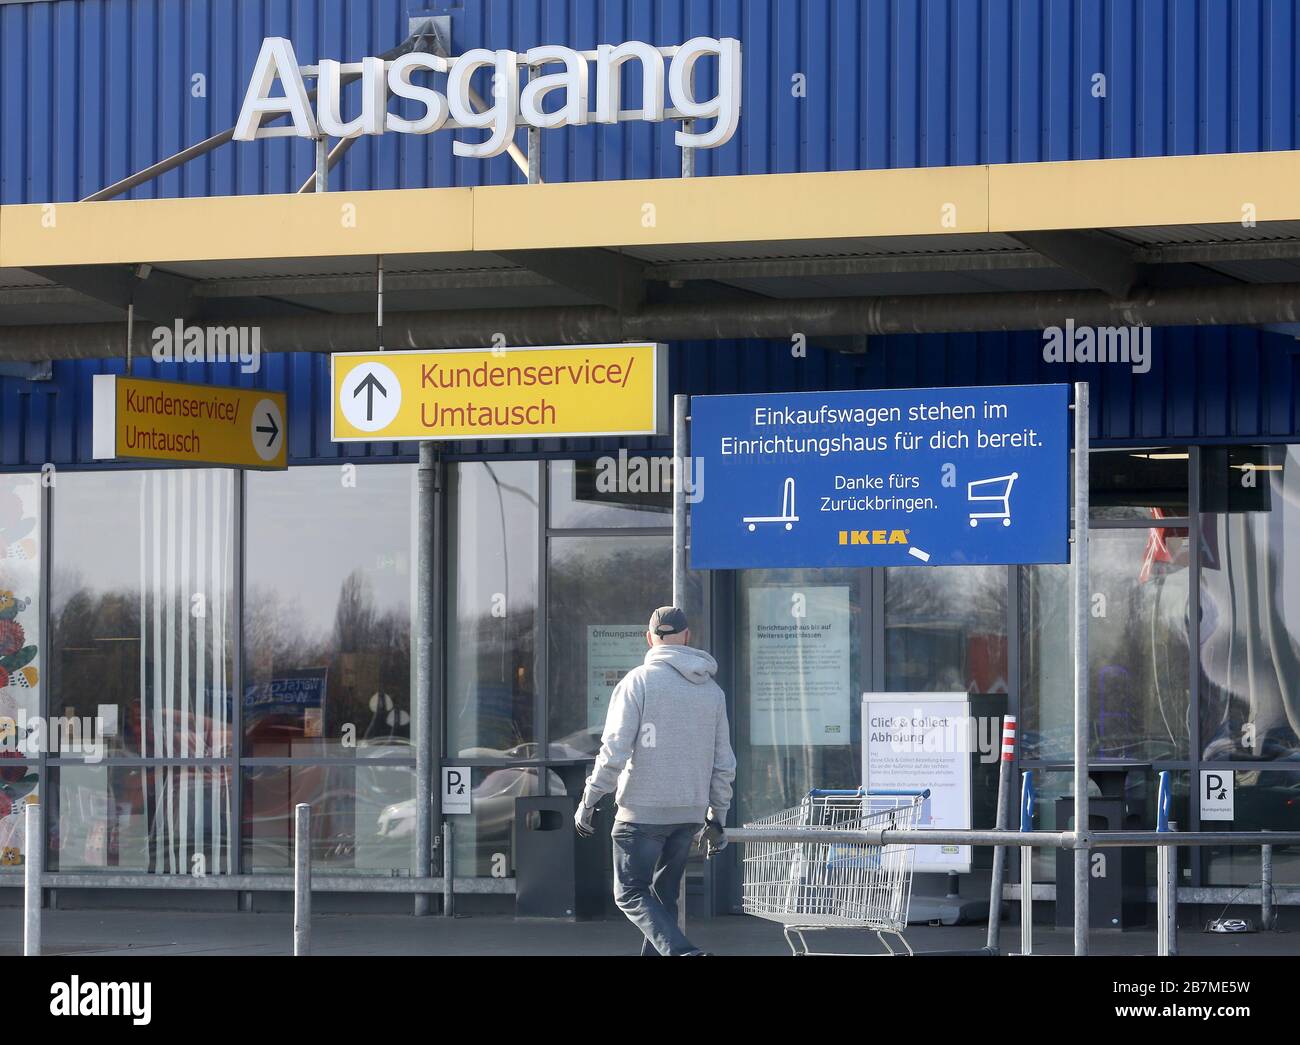 Duisburg Germany 17th Mar 2020 At The Exit Of The Ikea Store A